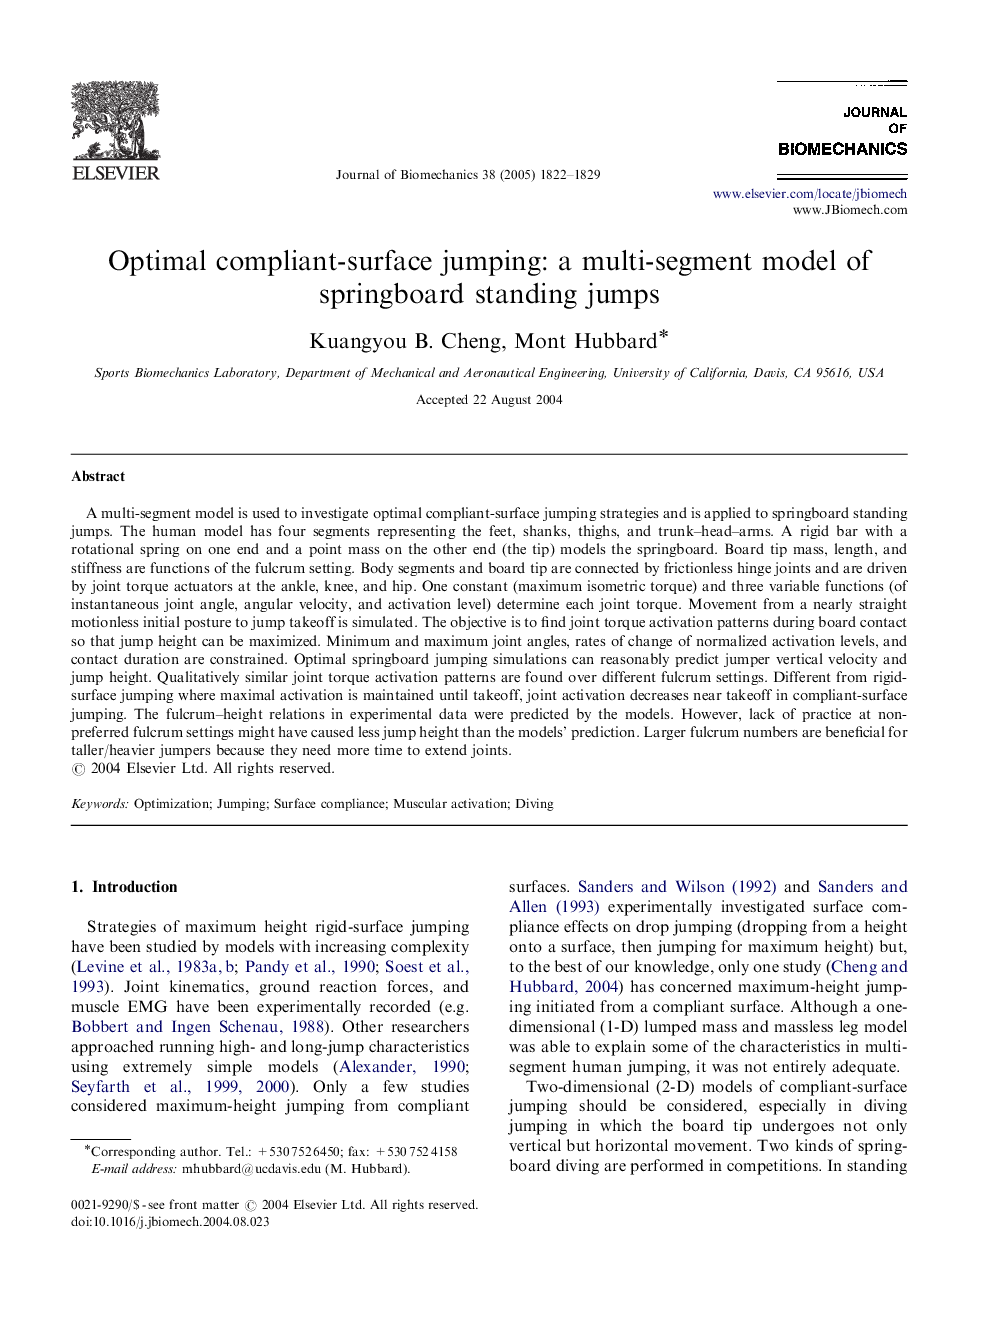 Optimal compliant-surface jumping: a multi-segment model of springboard standing jumps